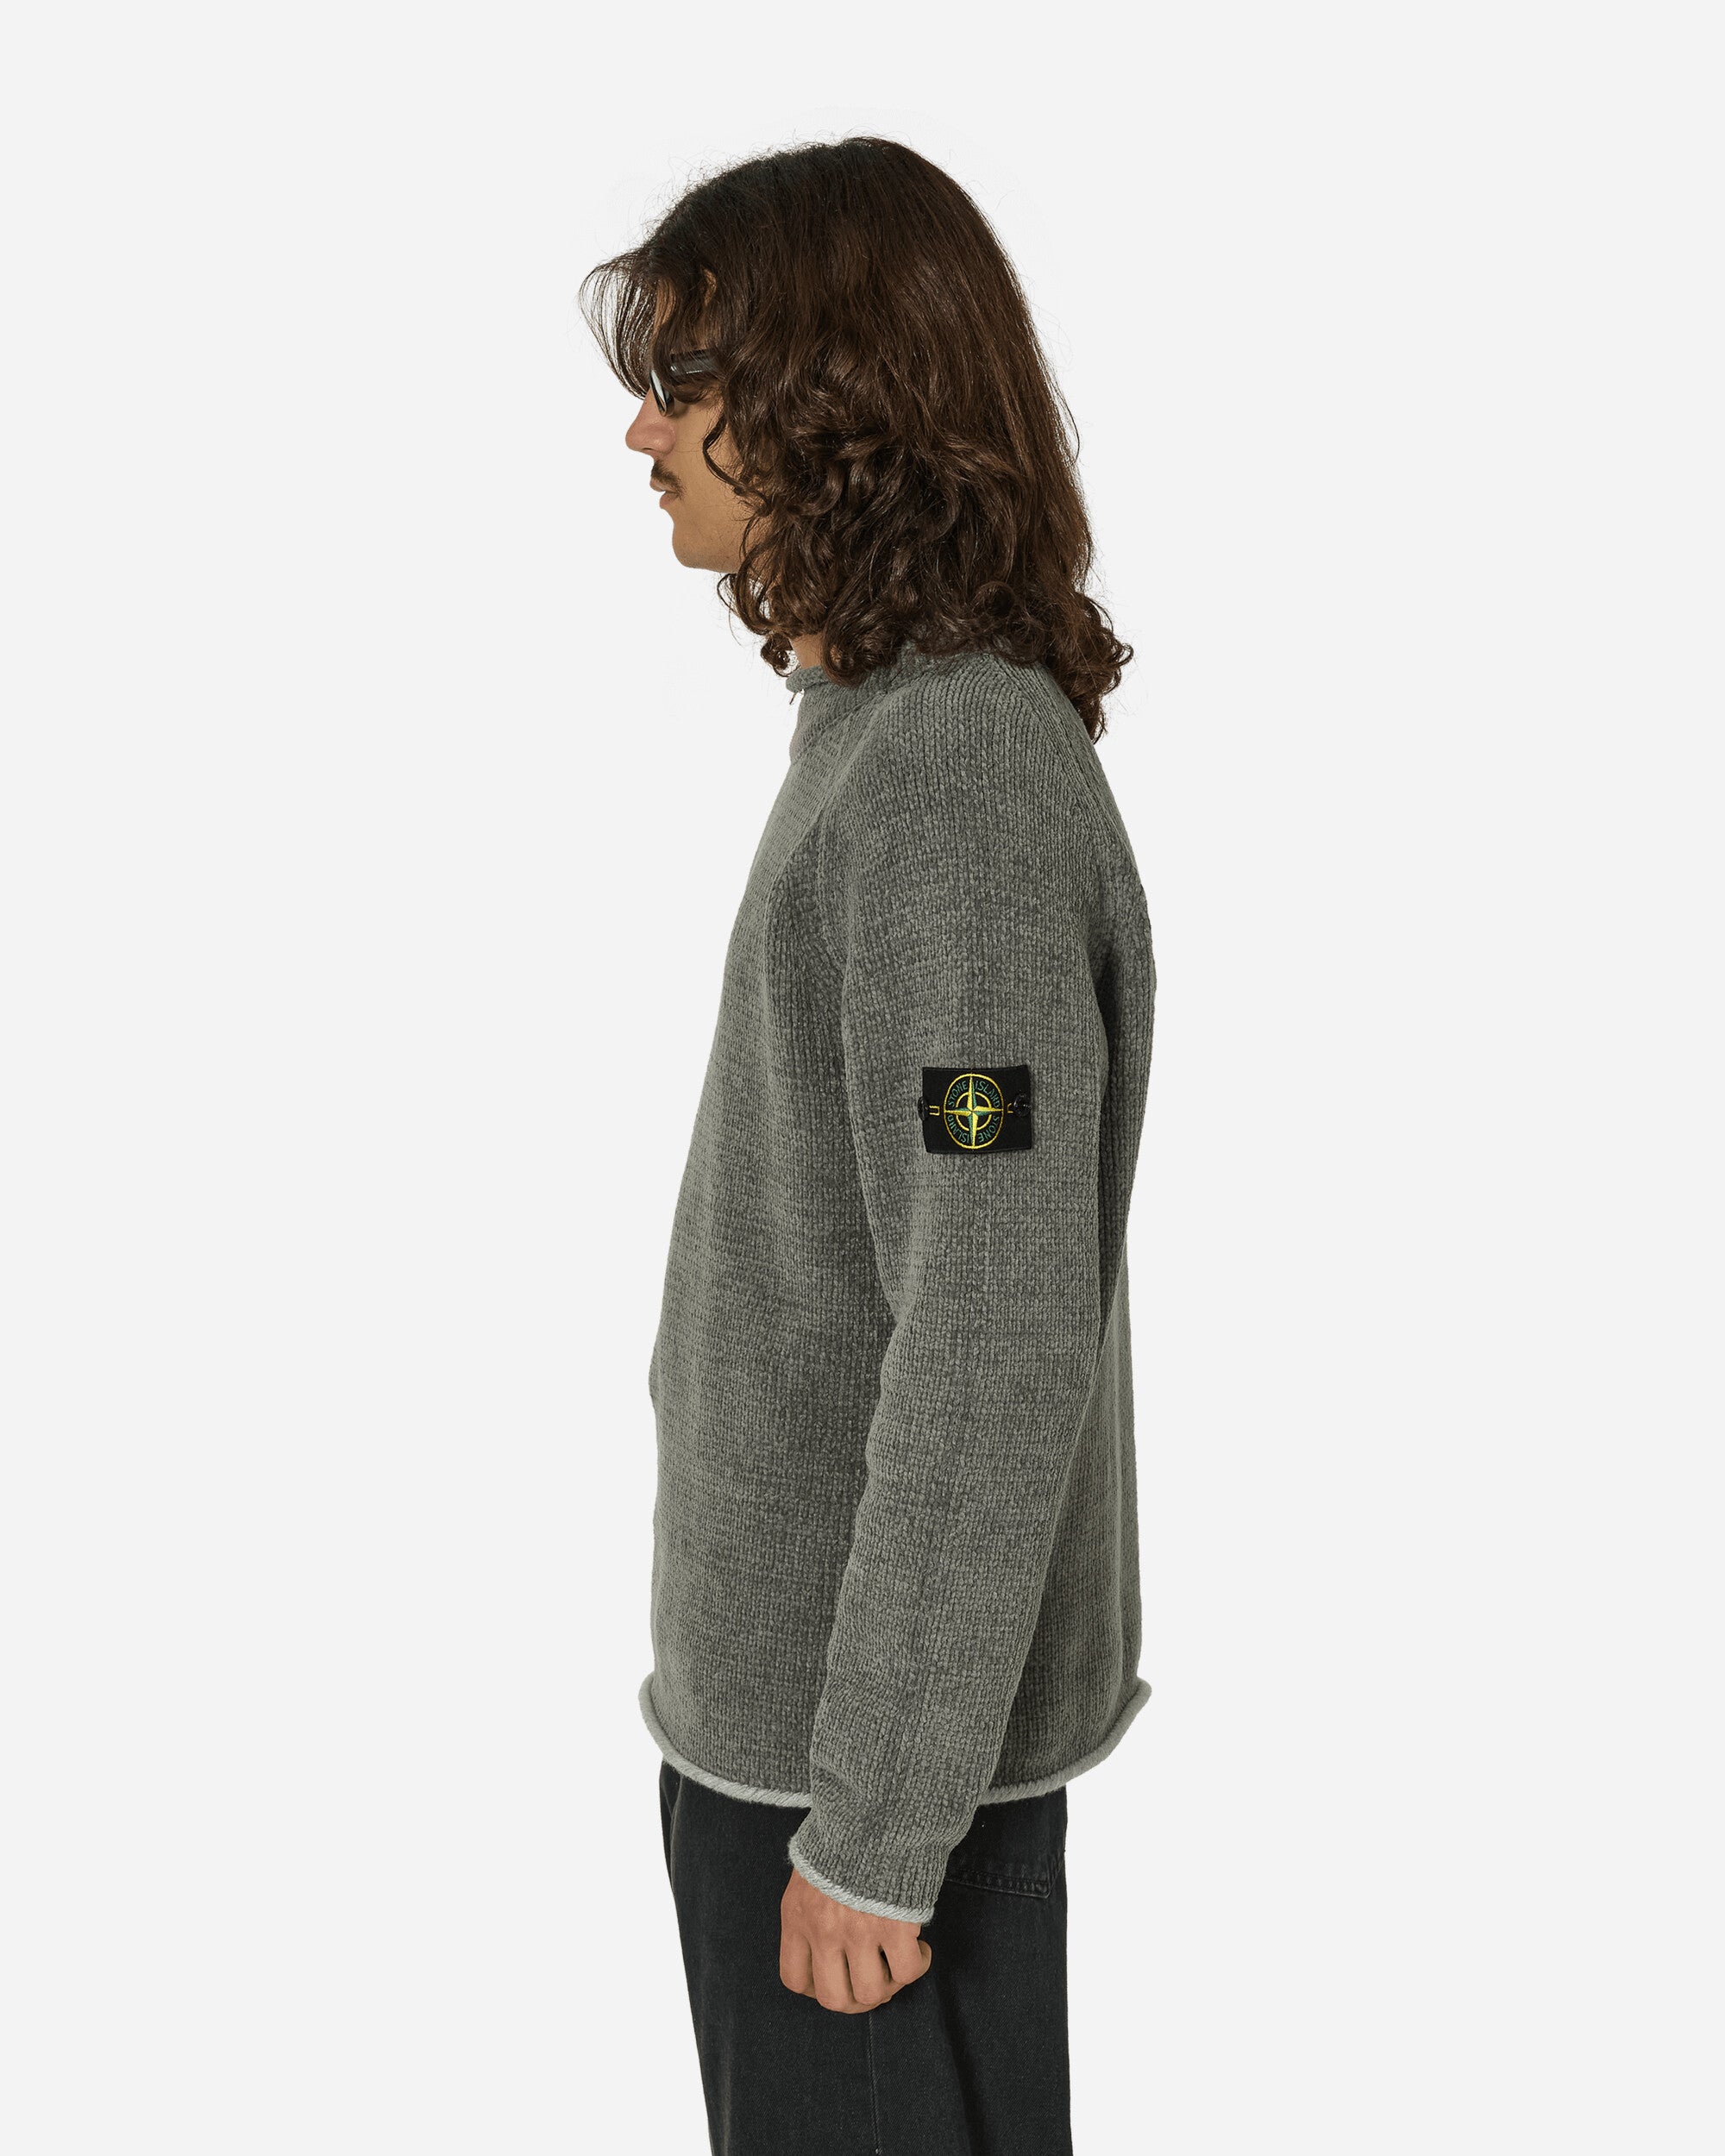 Stone Island Cotton Chenille Sweater Grey Green Knitwears Sweaters 8115557A9 V0066